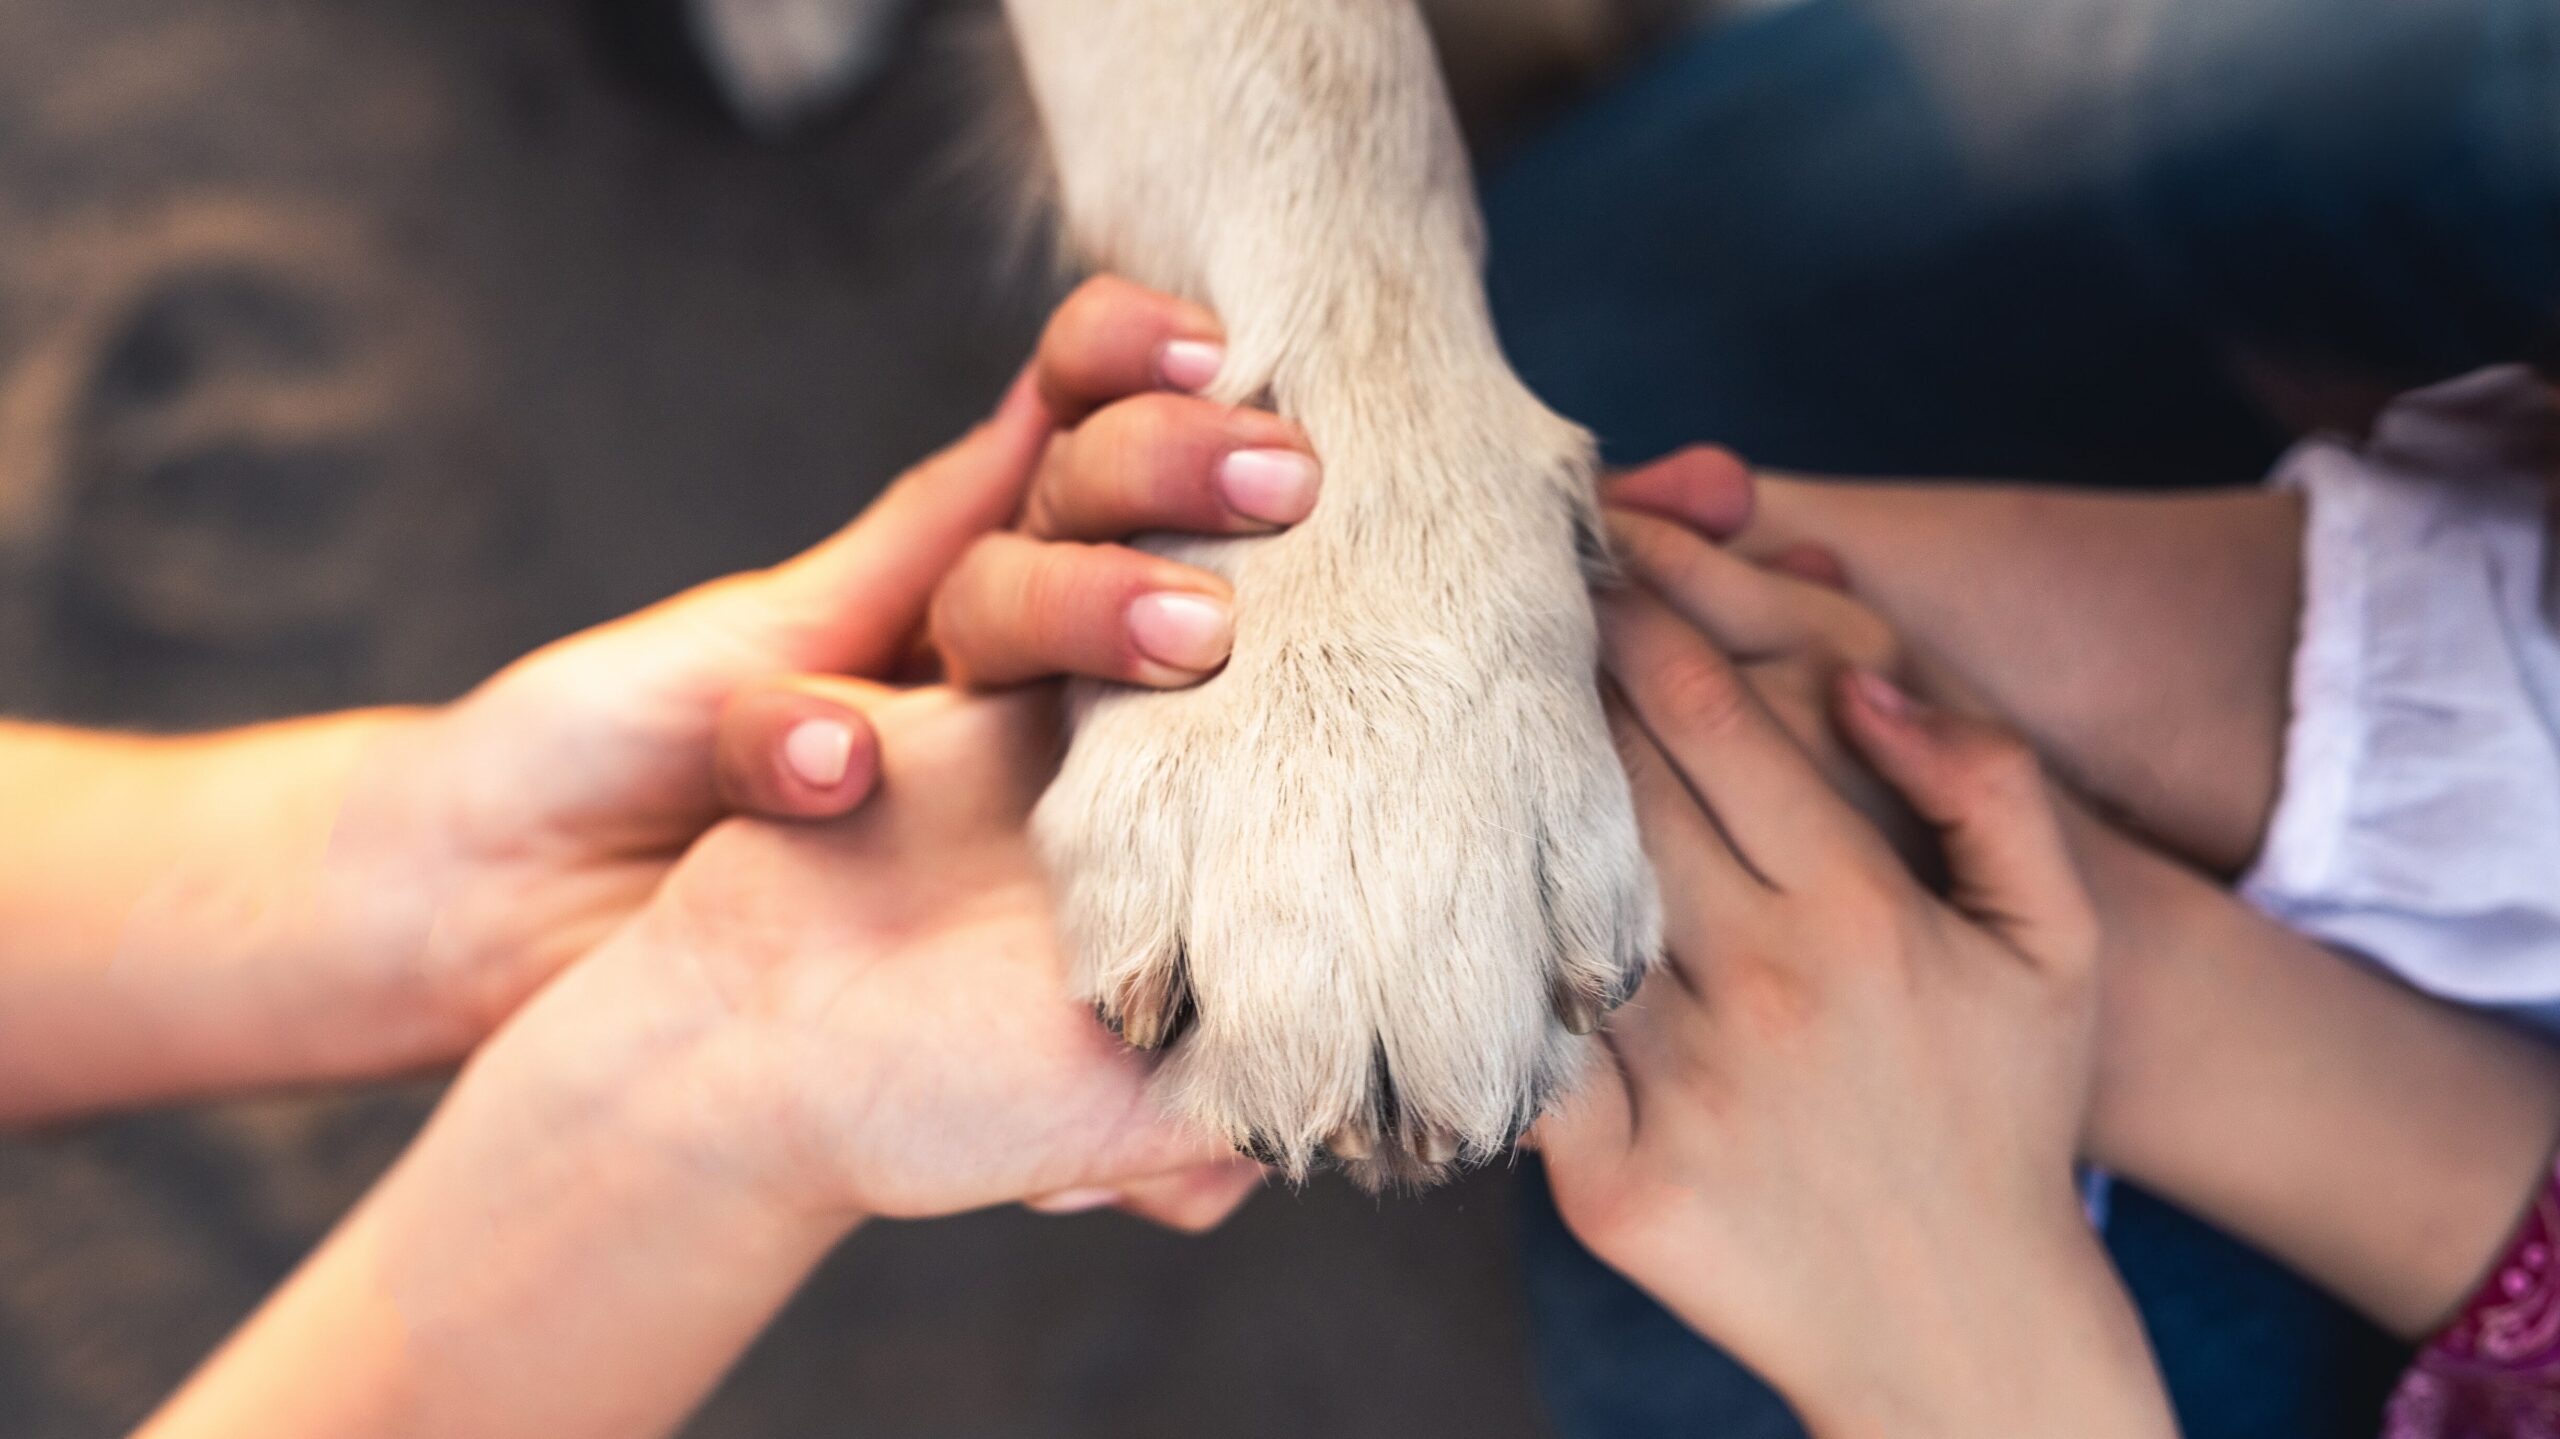 Human hands and dog paw, top view